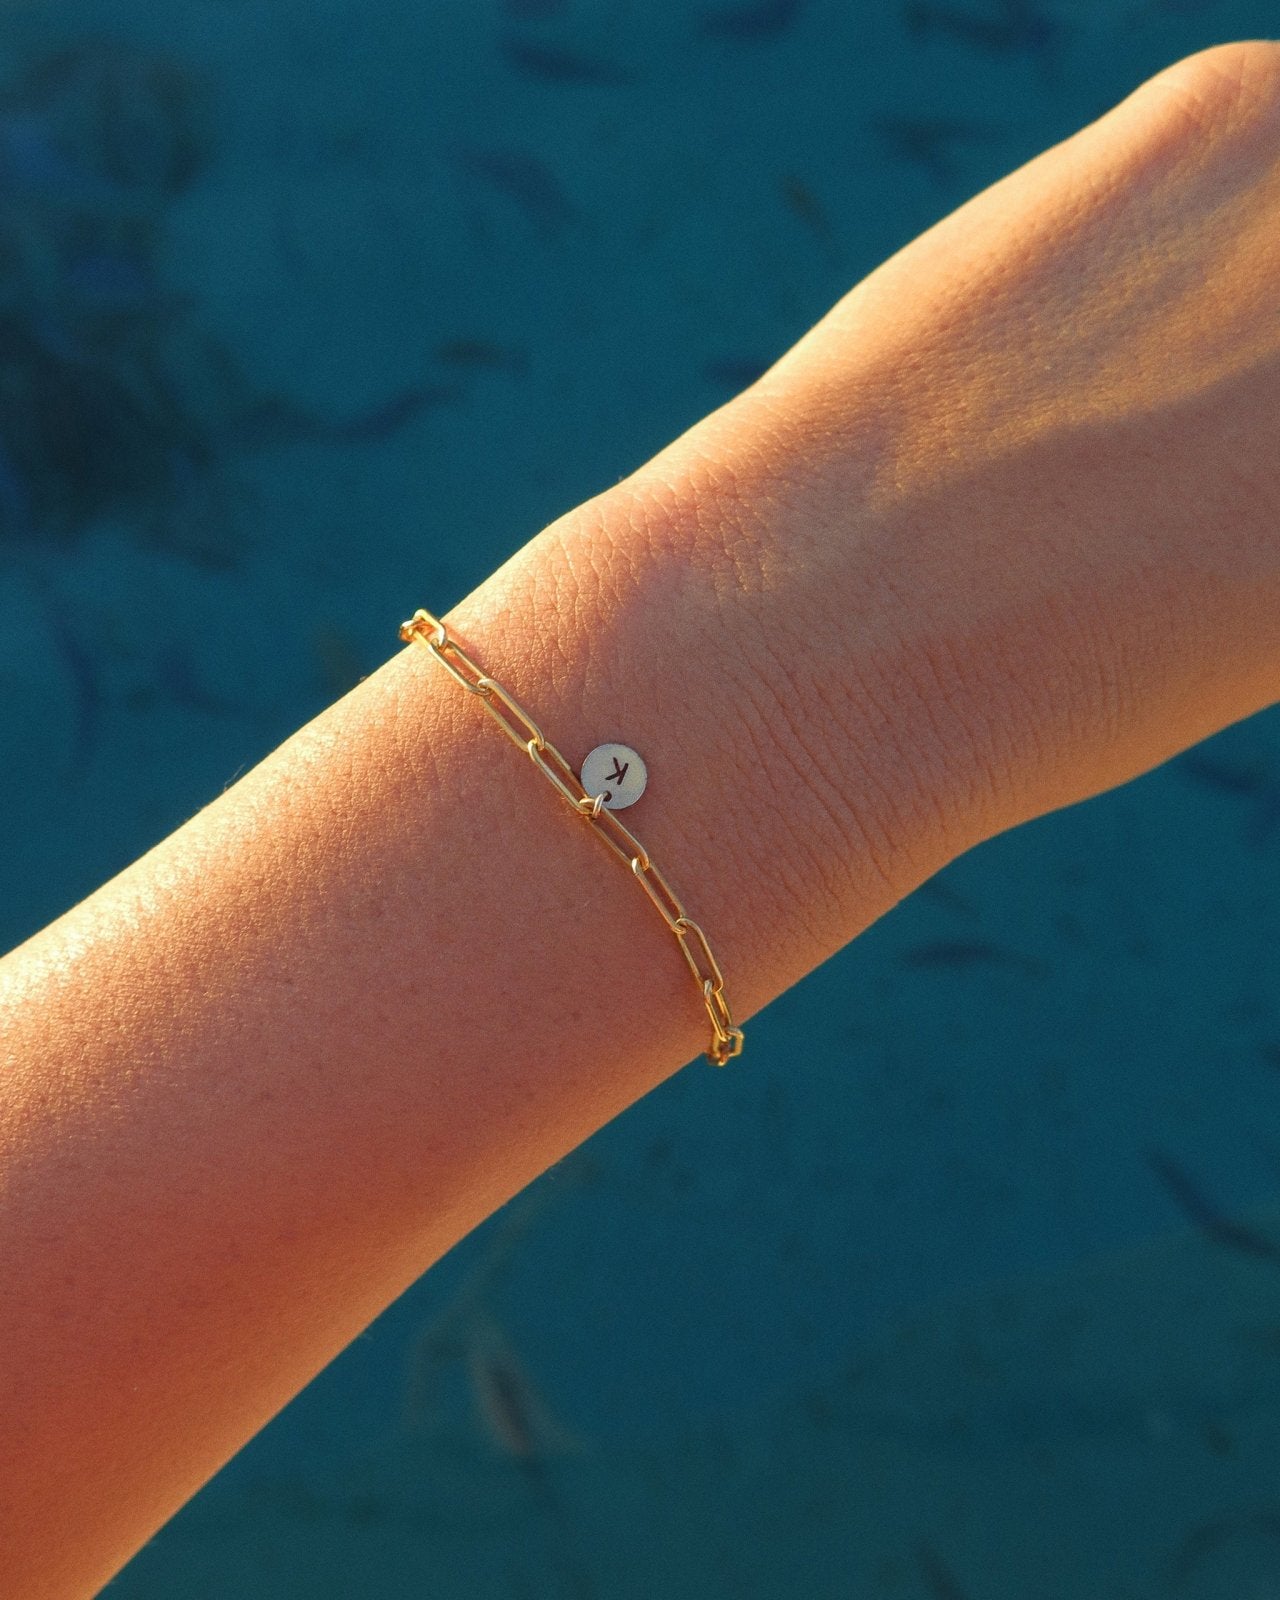 THICK DRAWN CABLE LETTER BRACELET - The Littl - 14k Yellow Gold Fill - 16cm